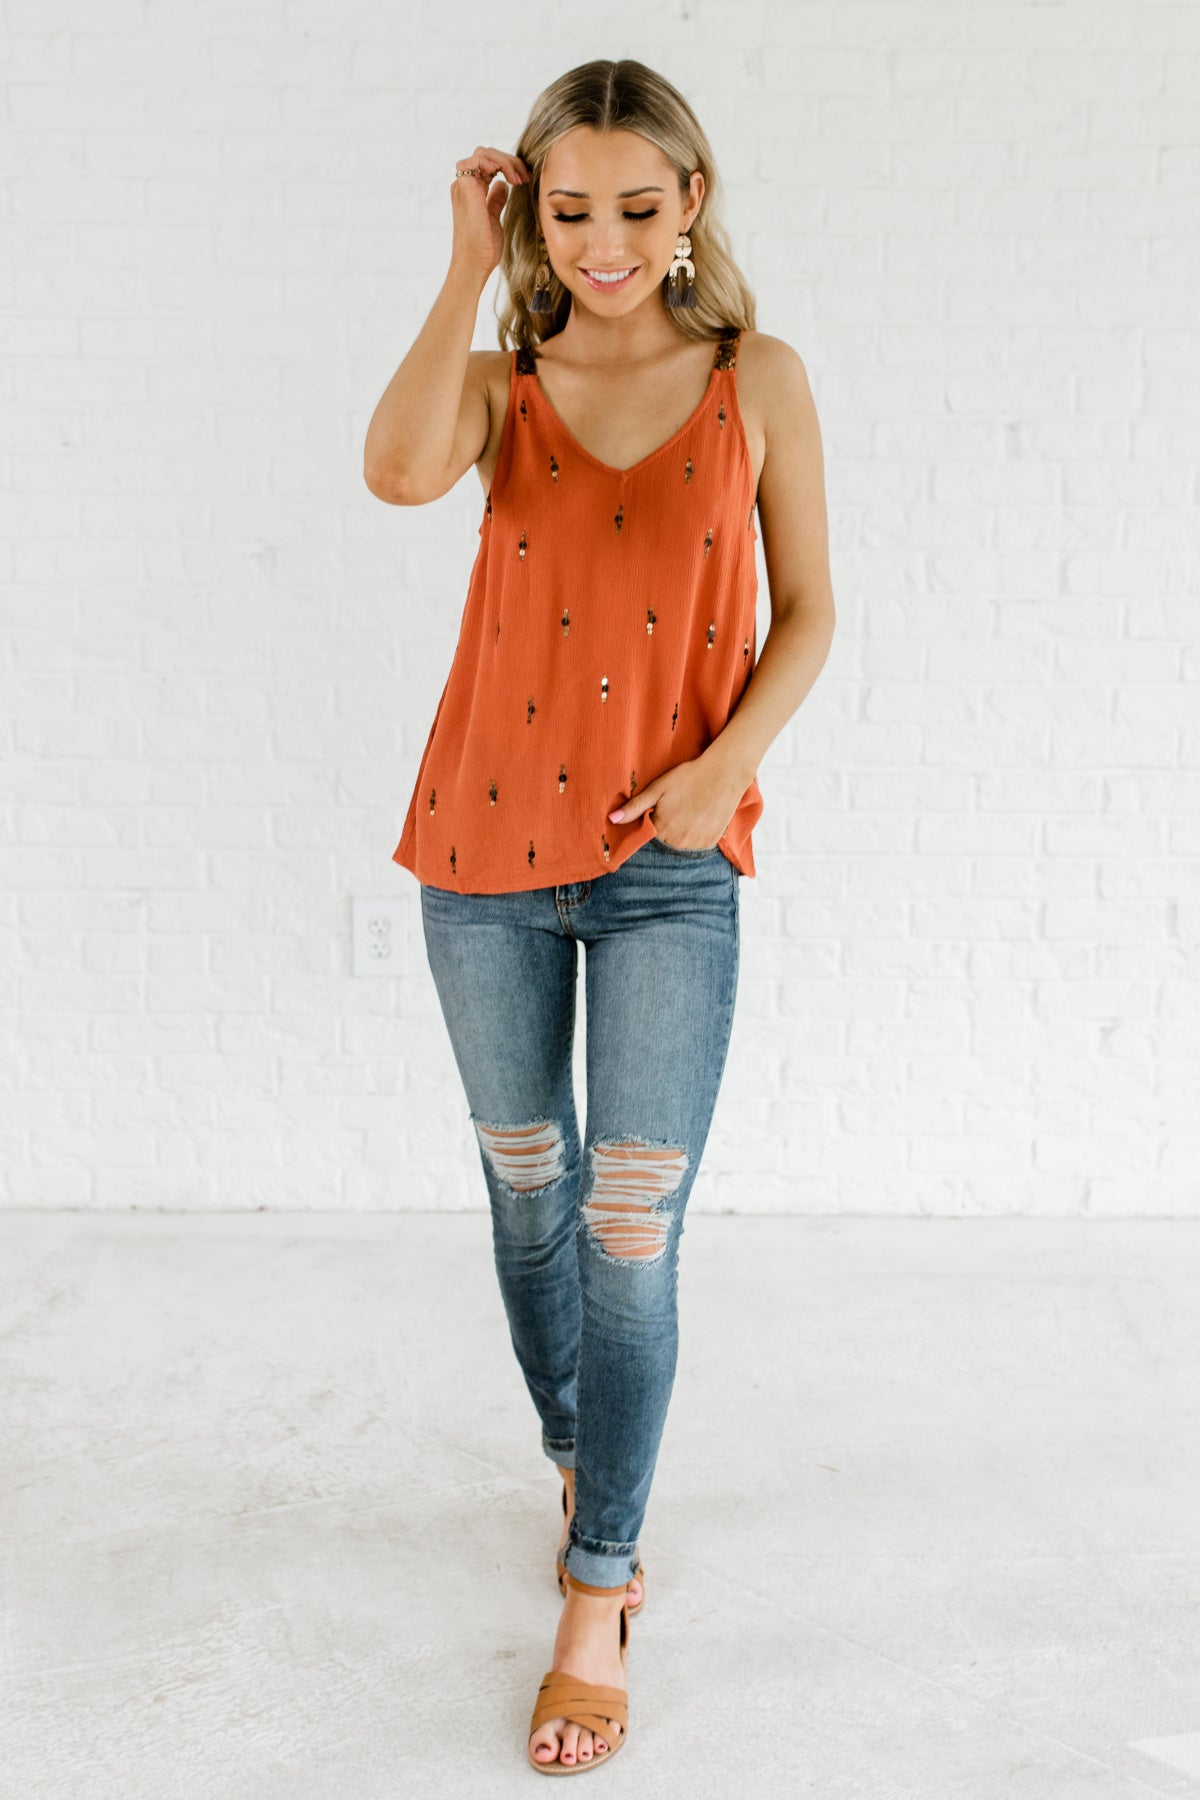 orange tank top outfit